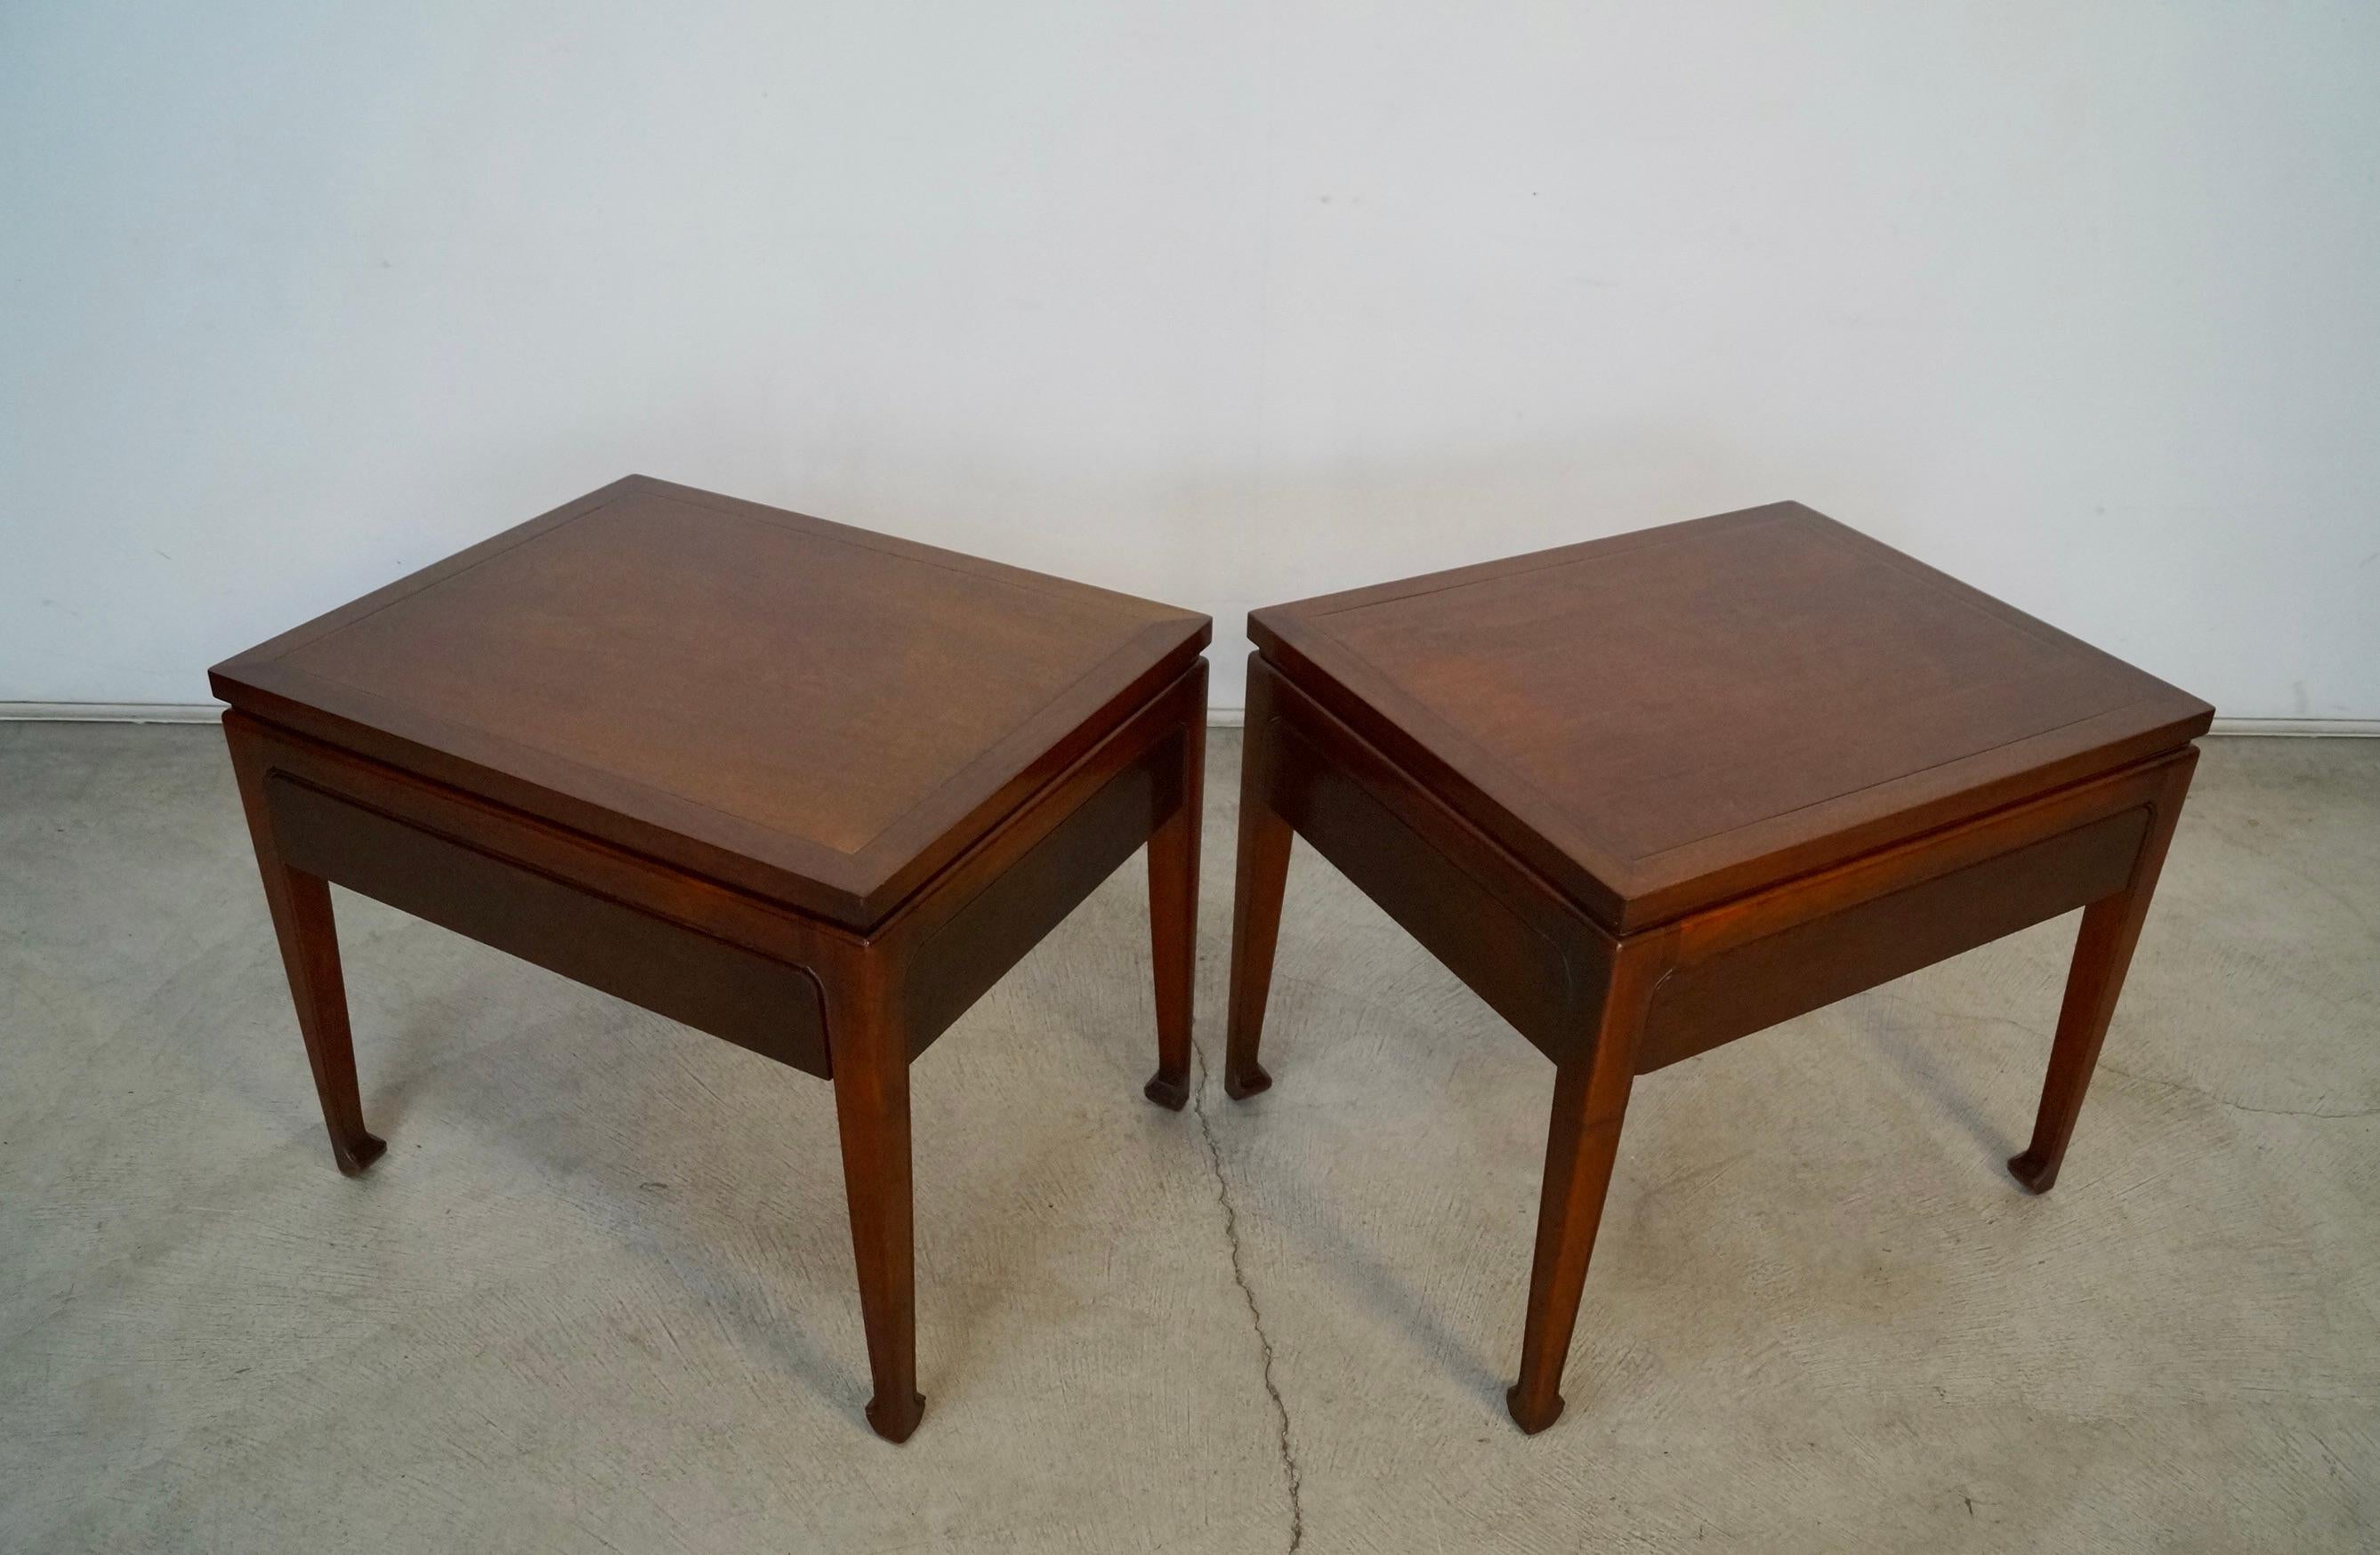 Mid-20th Century 1950's Mid-Century Modern Fine Arts Furniture Nightstands / Side Tables - A Pair